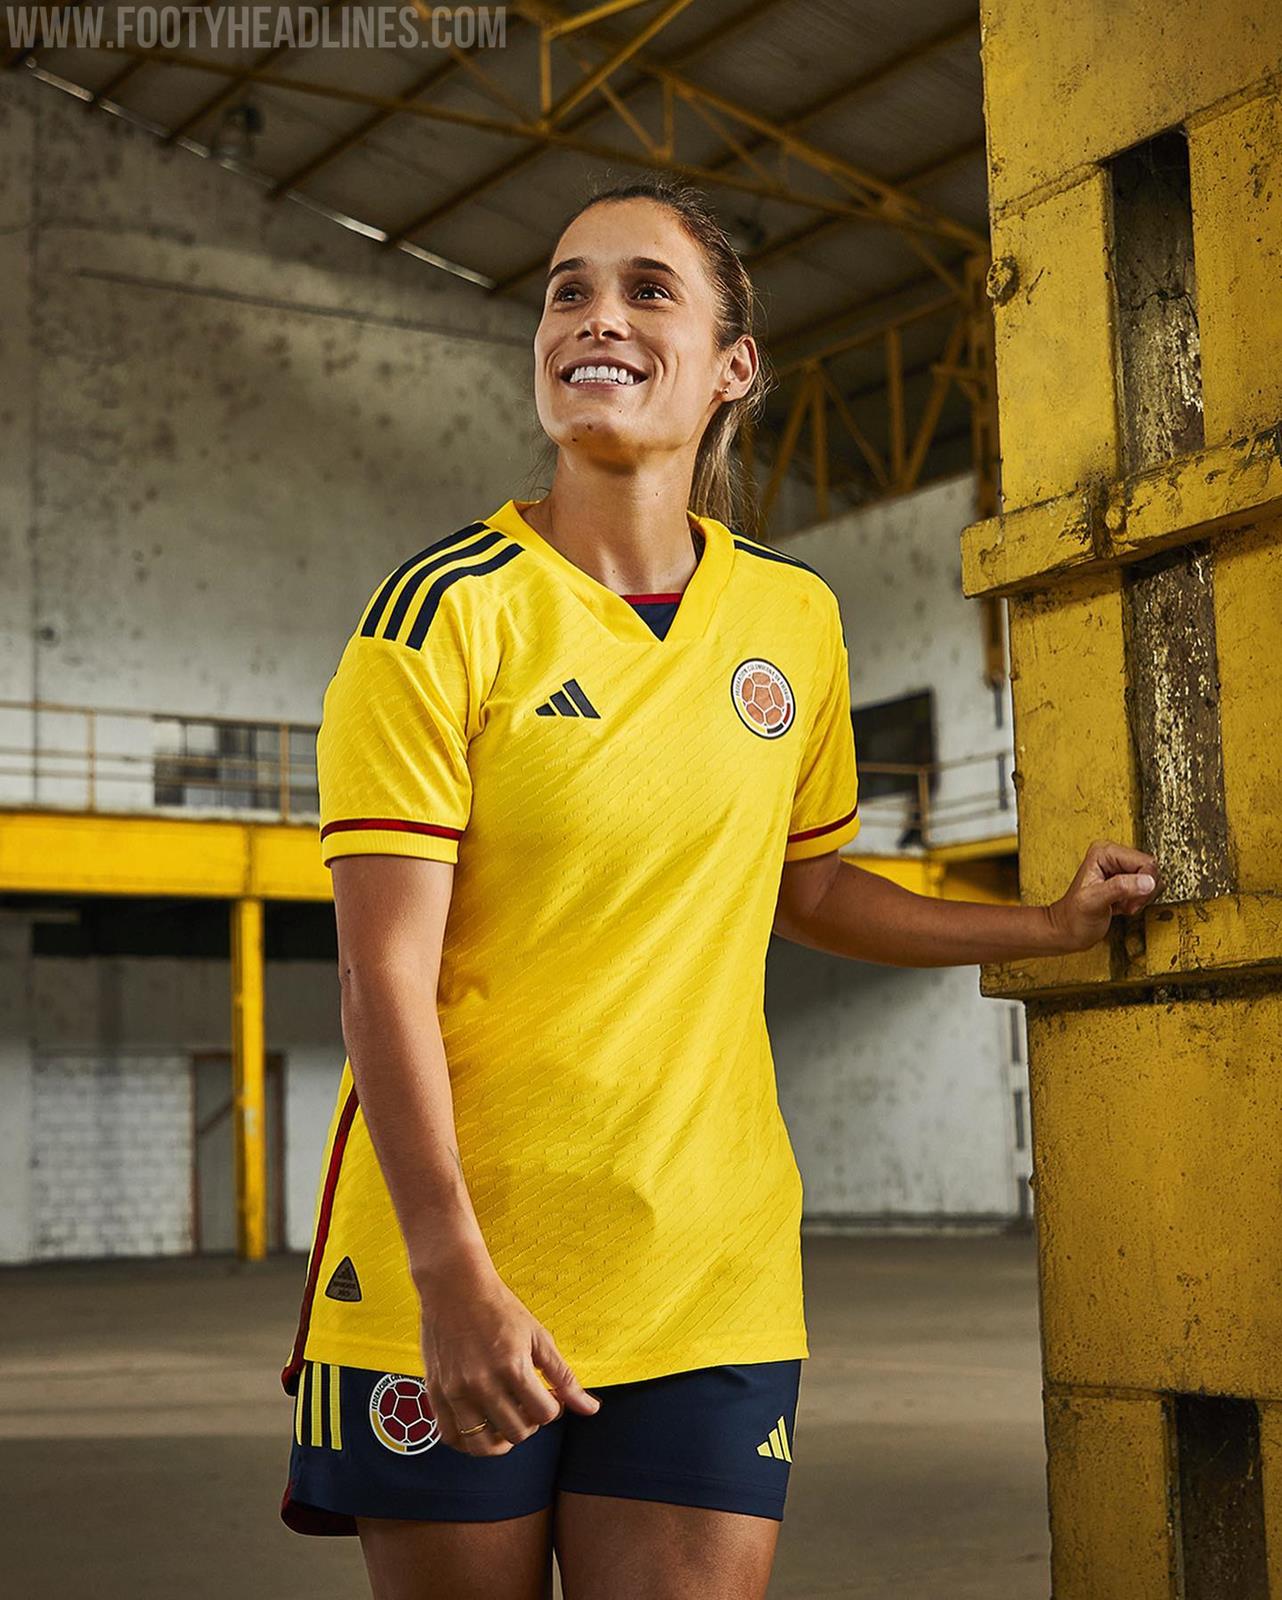 Colombia 2022 Adidas Away Kit - Football Shirt Culture - Latest Football  Kit News and More